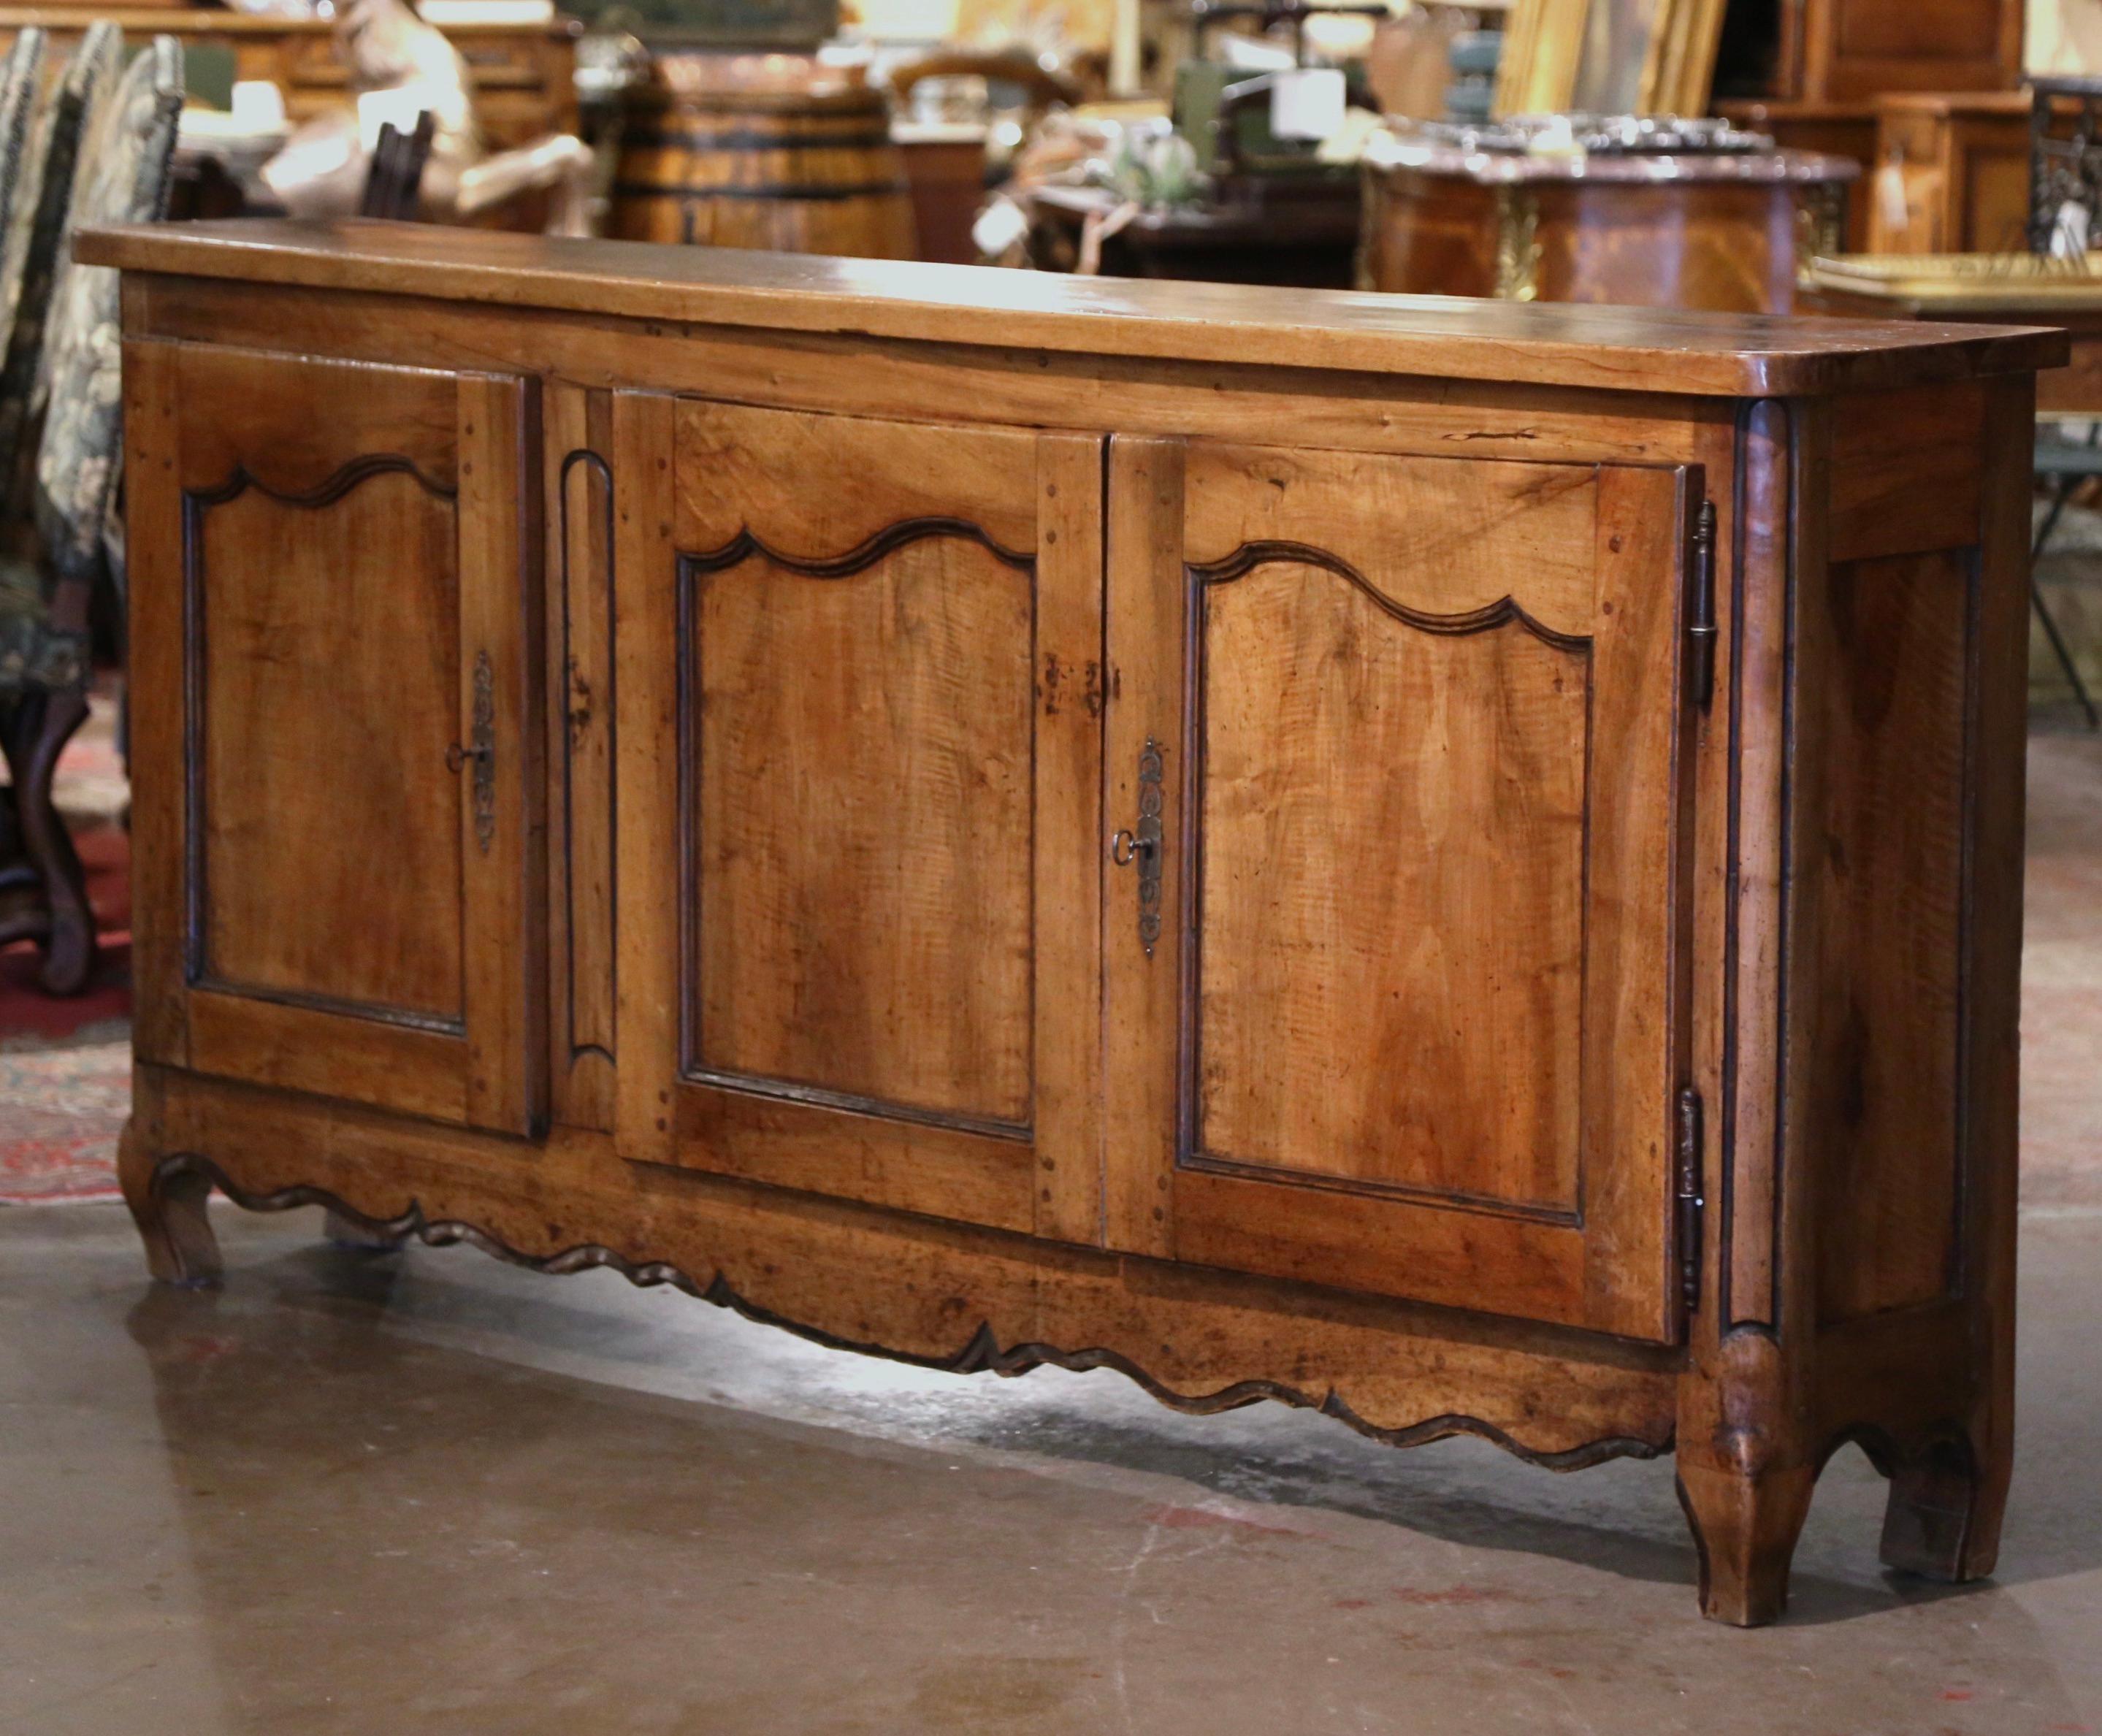 Beautiful and functional, this elegant antique enfilade from Southern France is not to be missed. Crafted in Lyon circa 1780, the buffet stands on curved feet over a scalloped apron. The cabinet has three doors across the front with recessed panels;